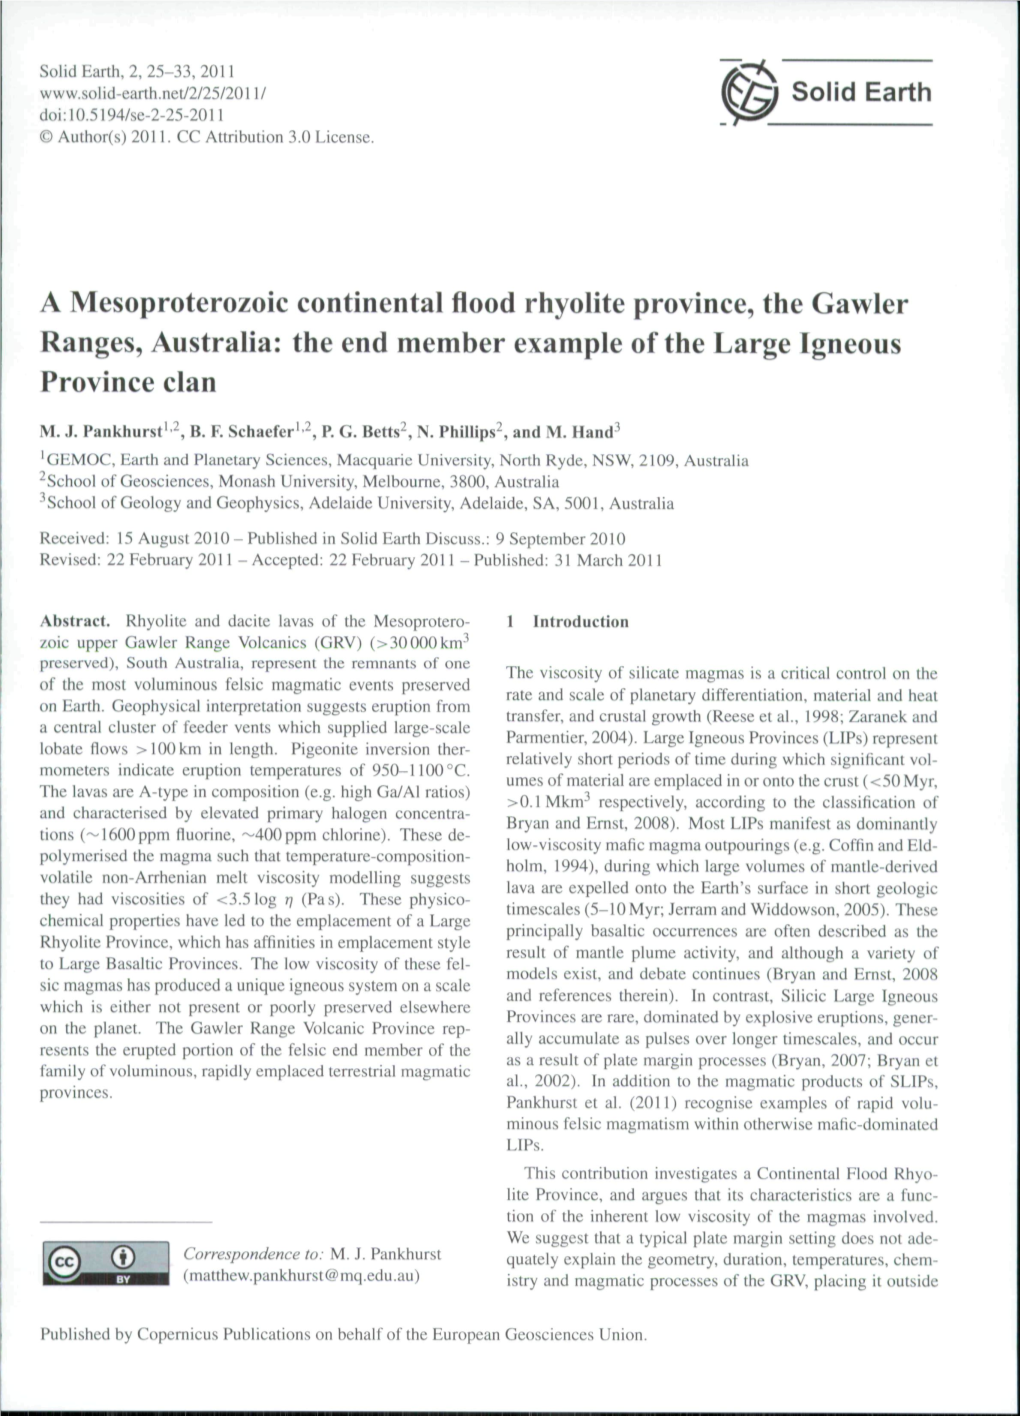 A Mesoproterozoic Continental Flood Rhyolite Province, the Gawler Ranges, Australia: the End Member Example Ofthe Large Igneous Province Clan